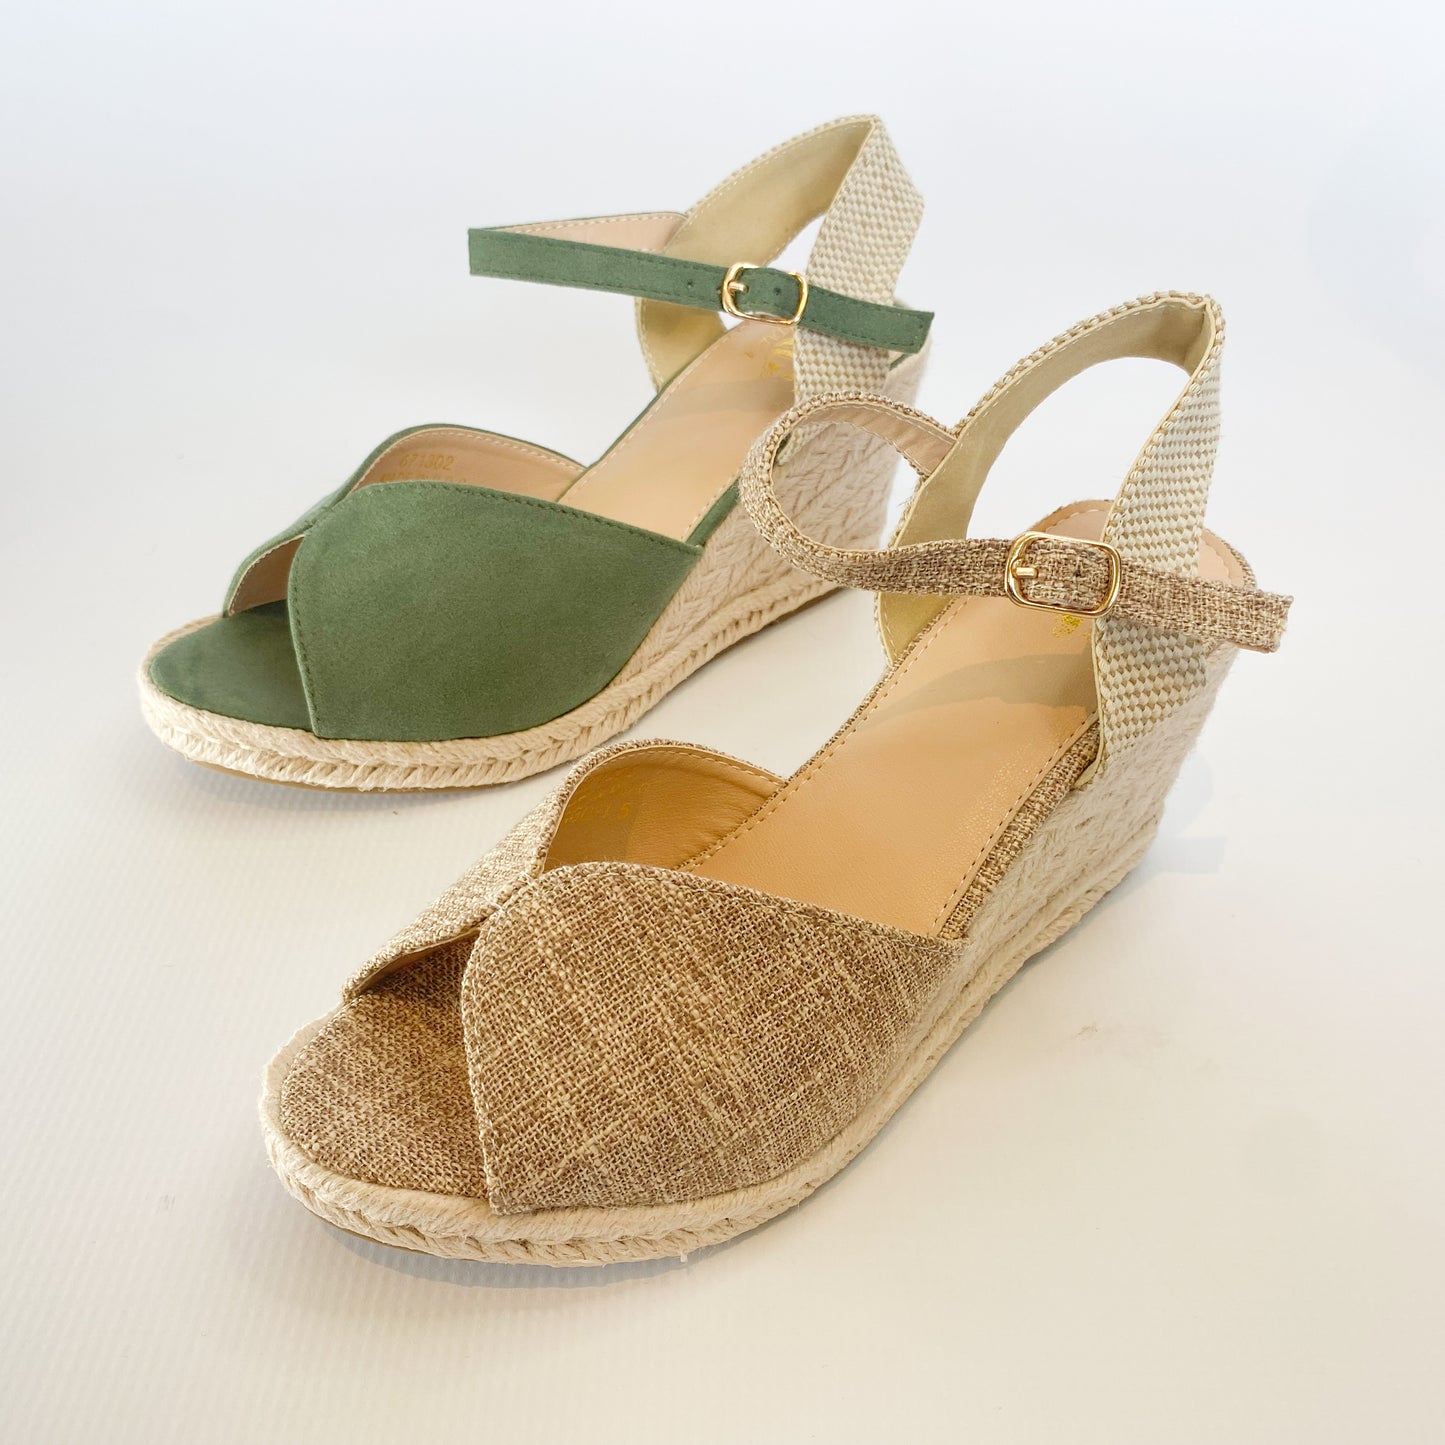 KG natural canvas ankle strap wedge